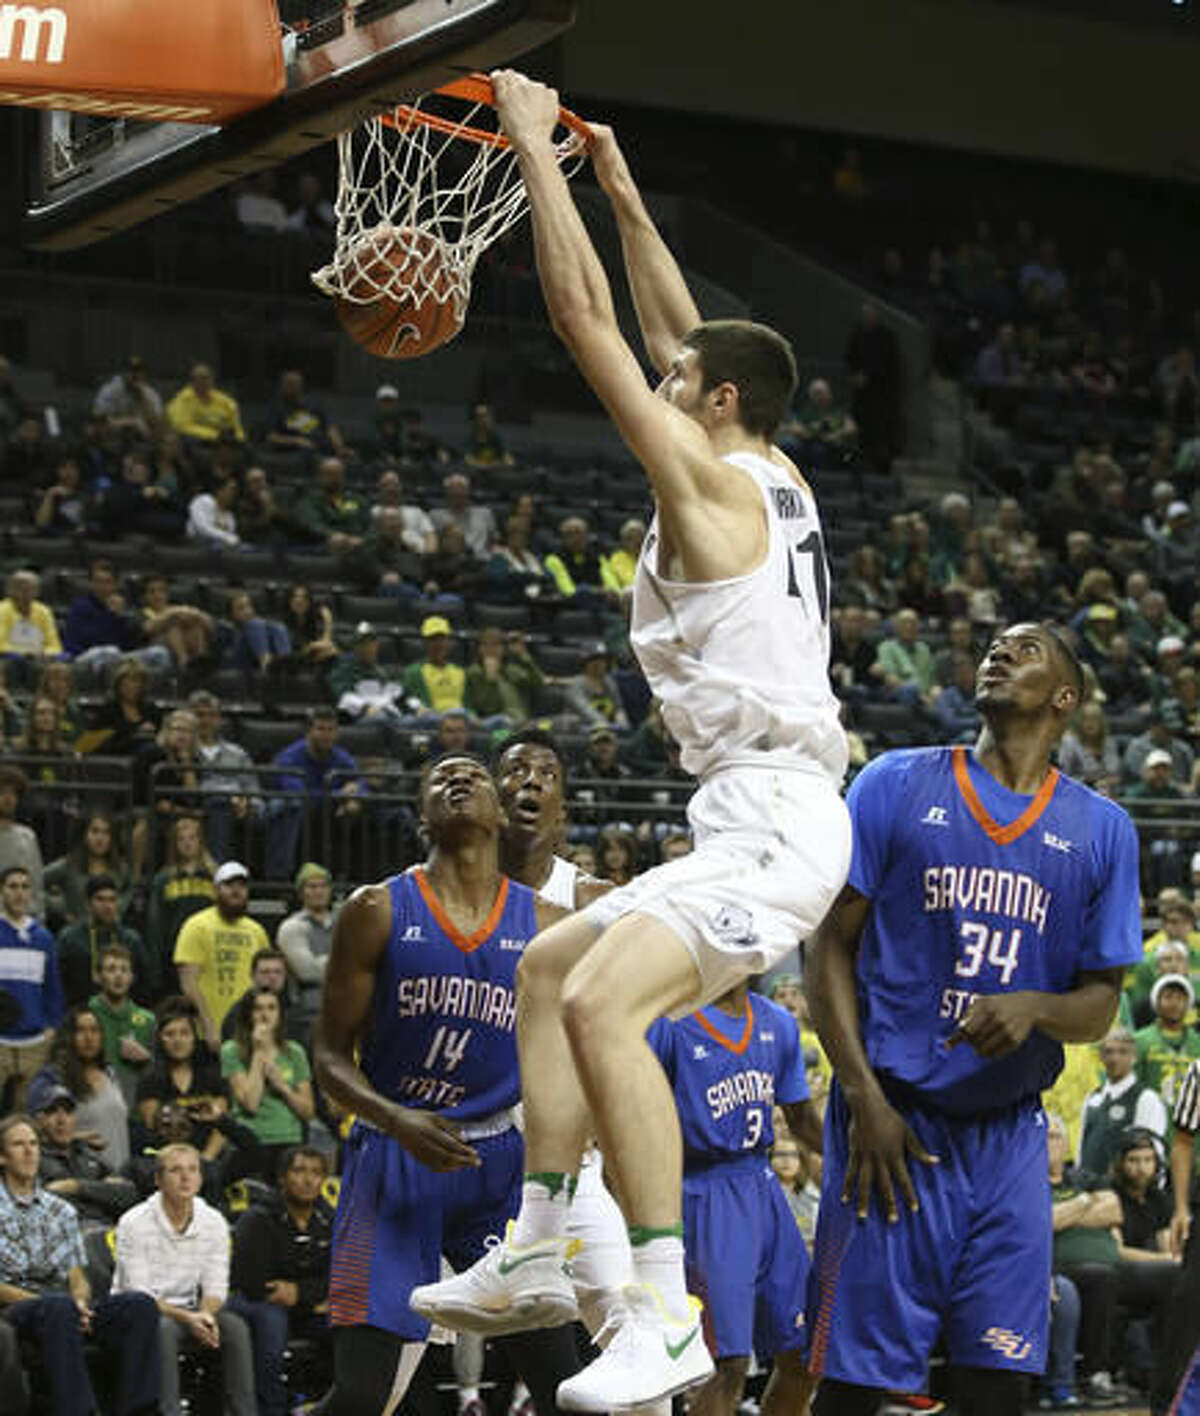 Oregon's Roman Sorkin, center, dunks against Savannah State during the second half of an NCAA college basketball game Saturday, Dec. 3, 2016, in Eugene, Ore. (AP Photo/Chris Pietsch)